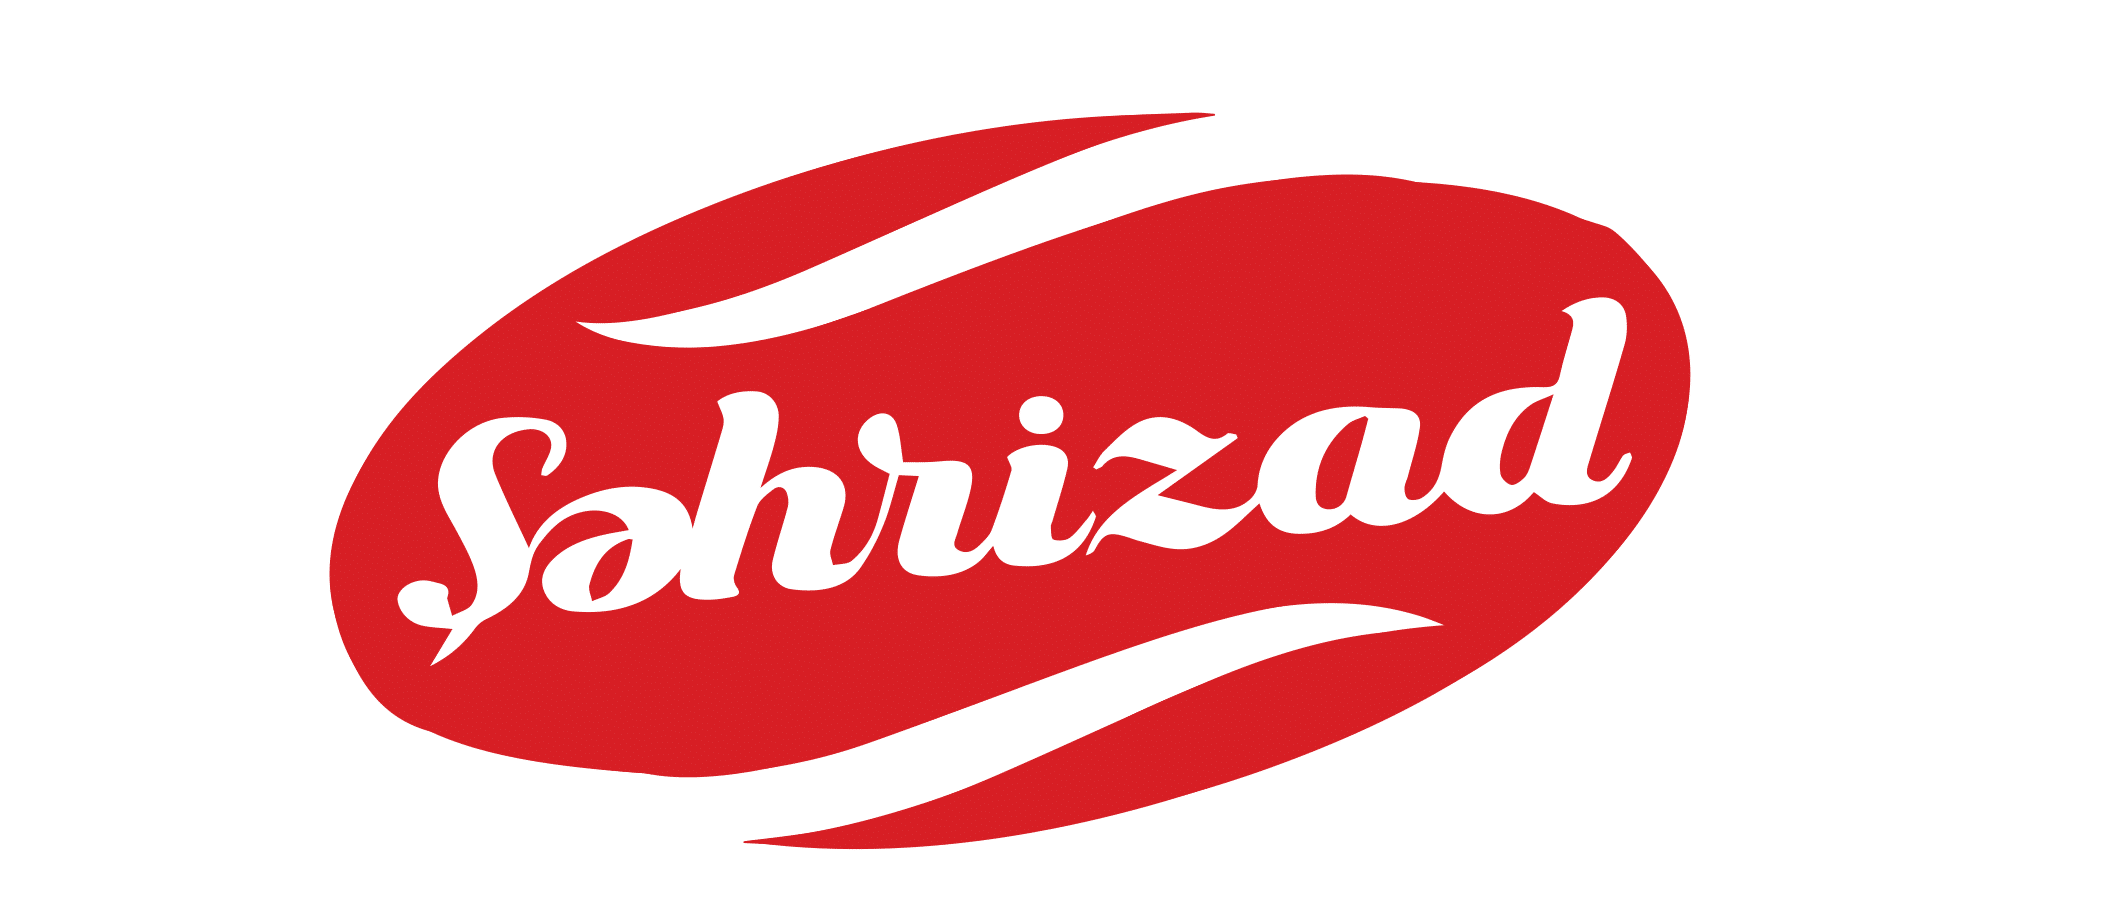 sehrizad